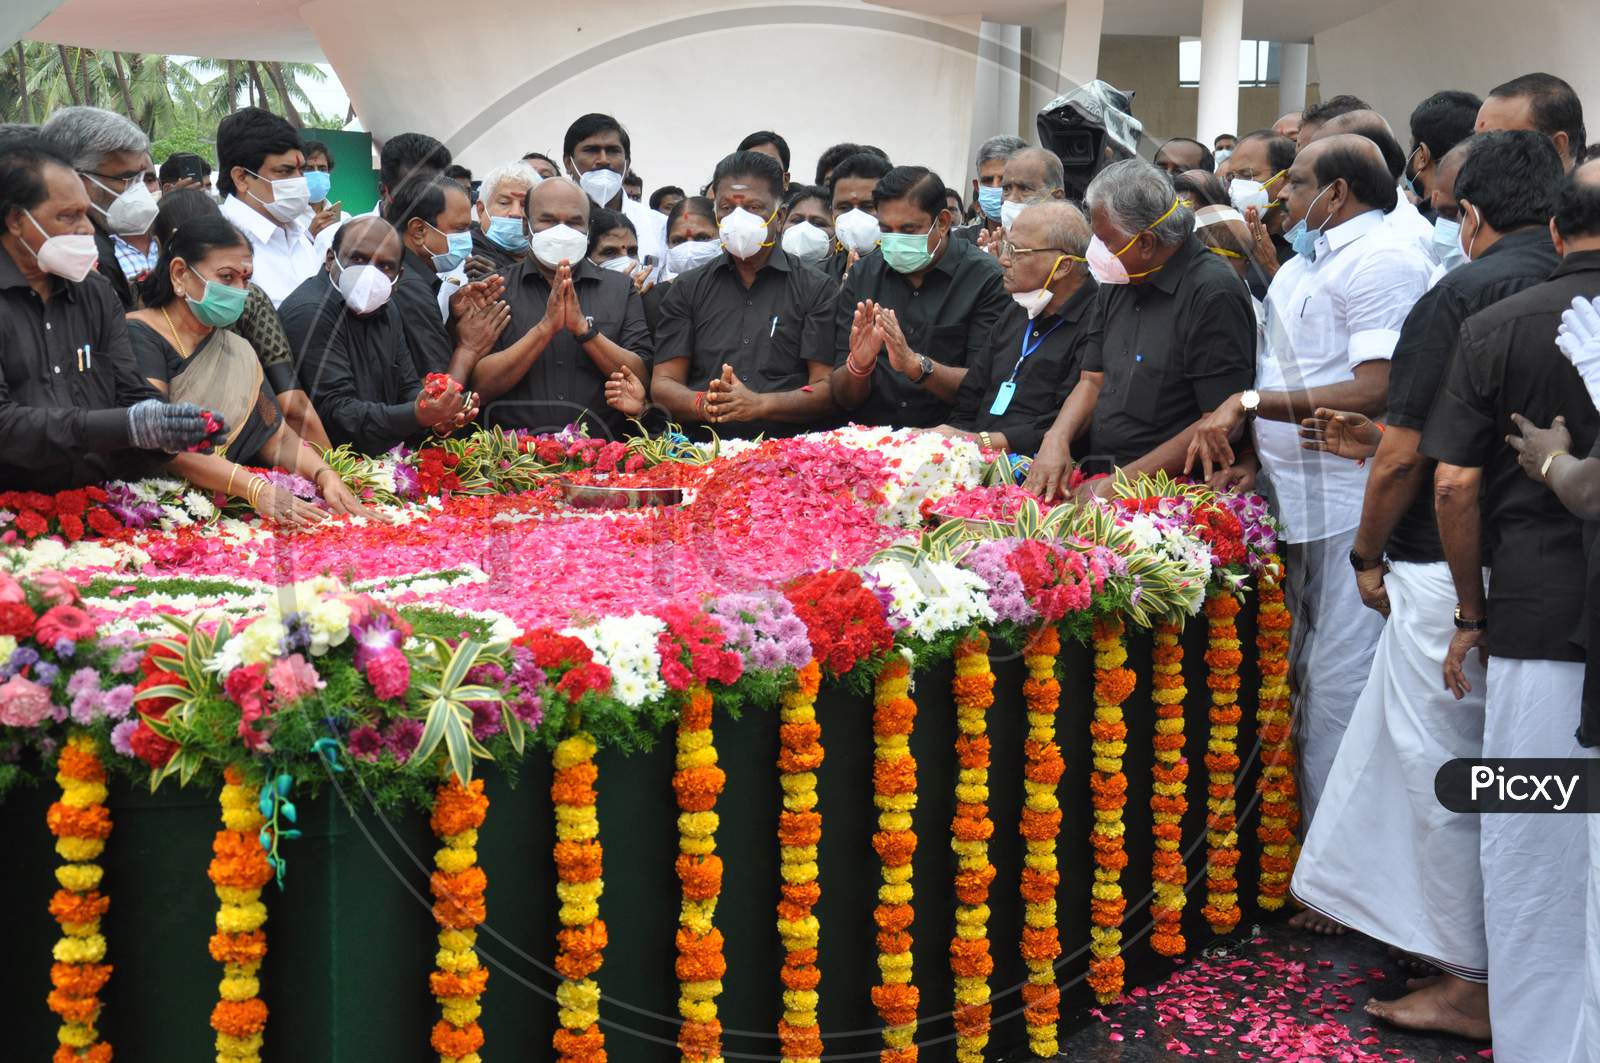 Tamil Nadu Chief Minister Edappadi K Palaniswami, Deputy Chief Minister O Panneerselvam And Aiadmk Senior Leaders Pay Tribute To Former Chief Minister Jayalalithaa On Her Fourth Death Anniversary, In Chennai, Saturday, Dec. 5, 2020.